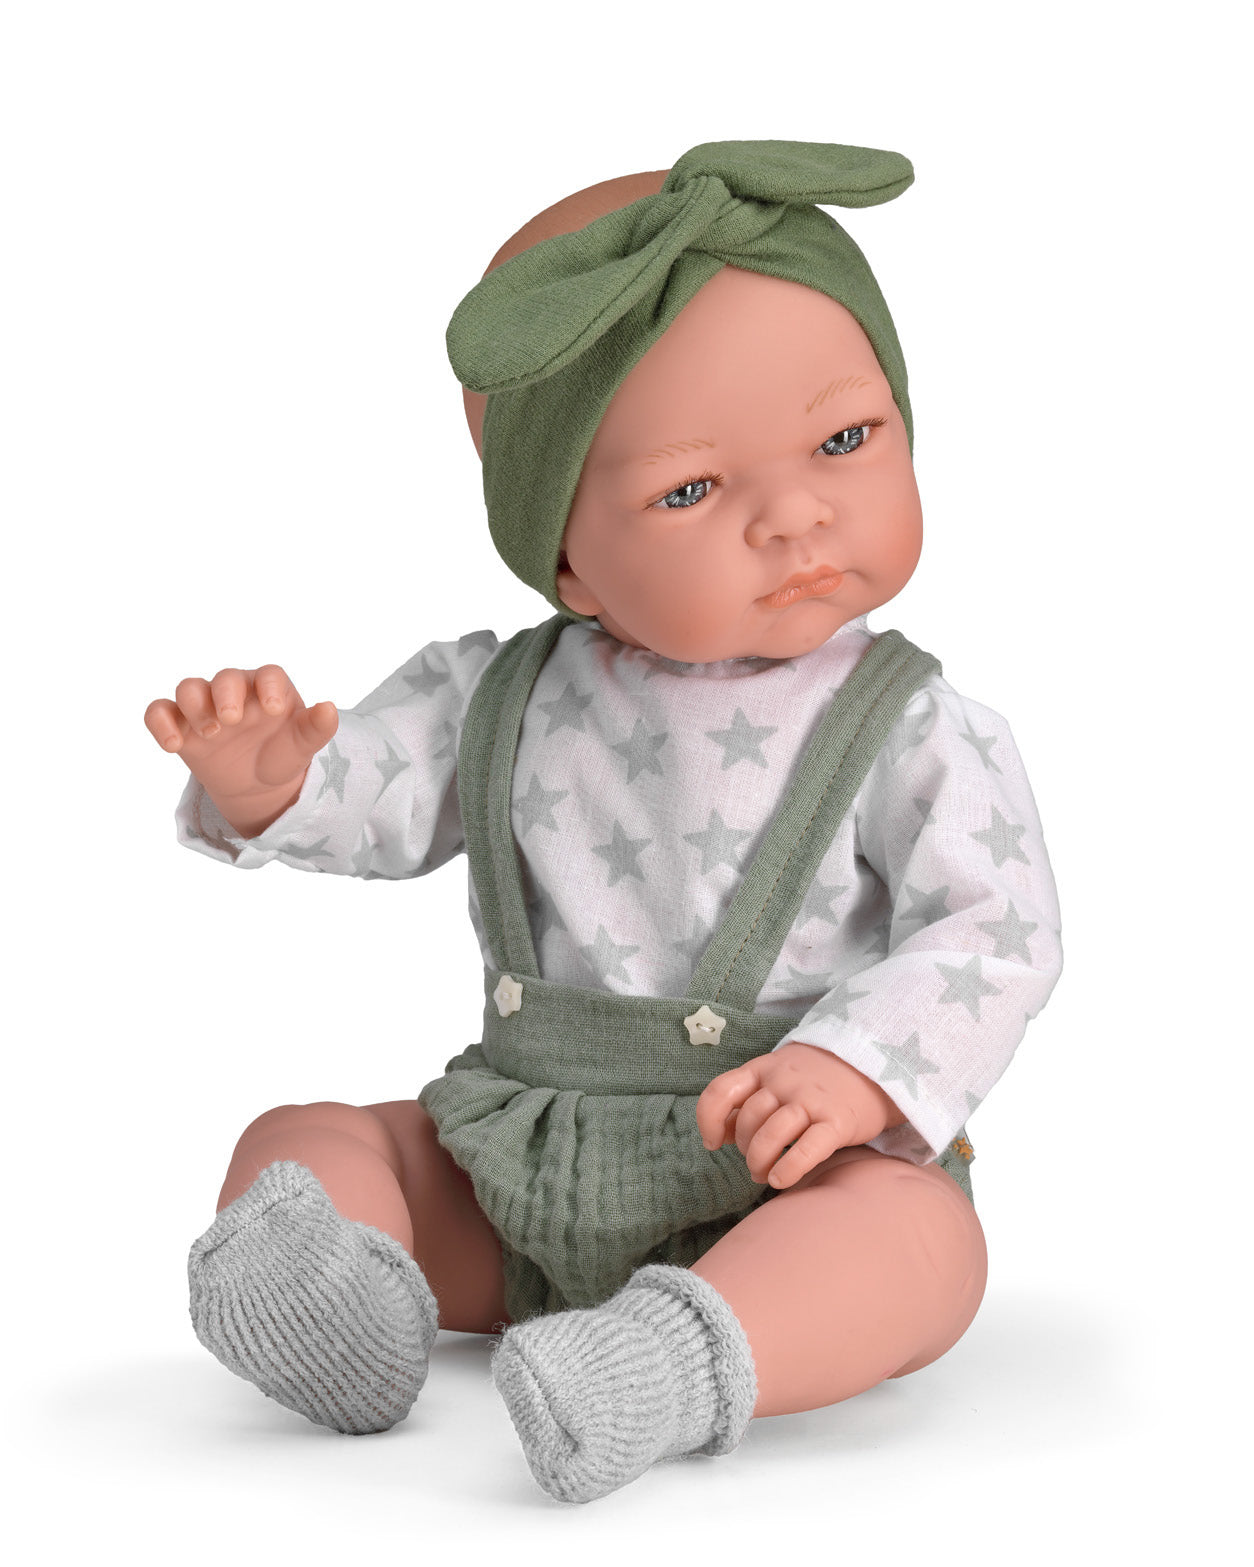 Handcrafted Jenny Collection Magic Baby Doll (46409) by LAMAGIK